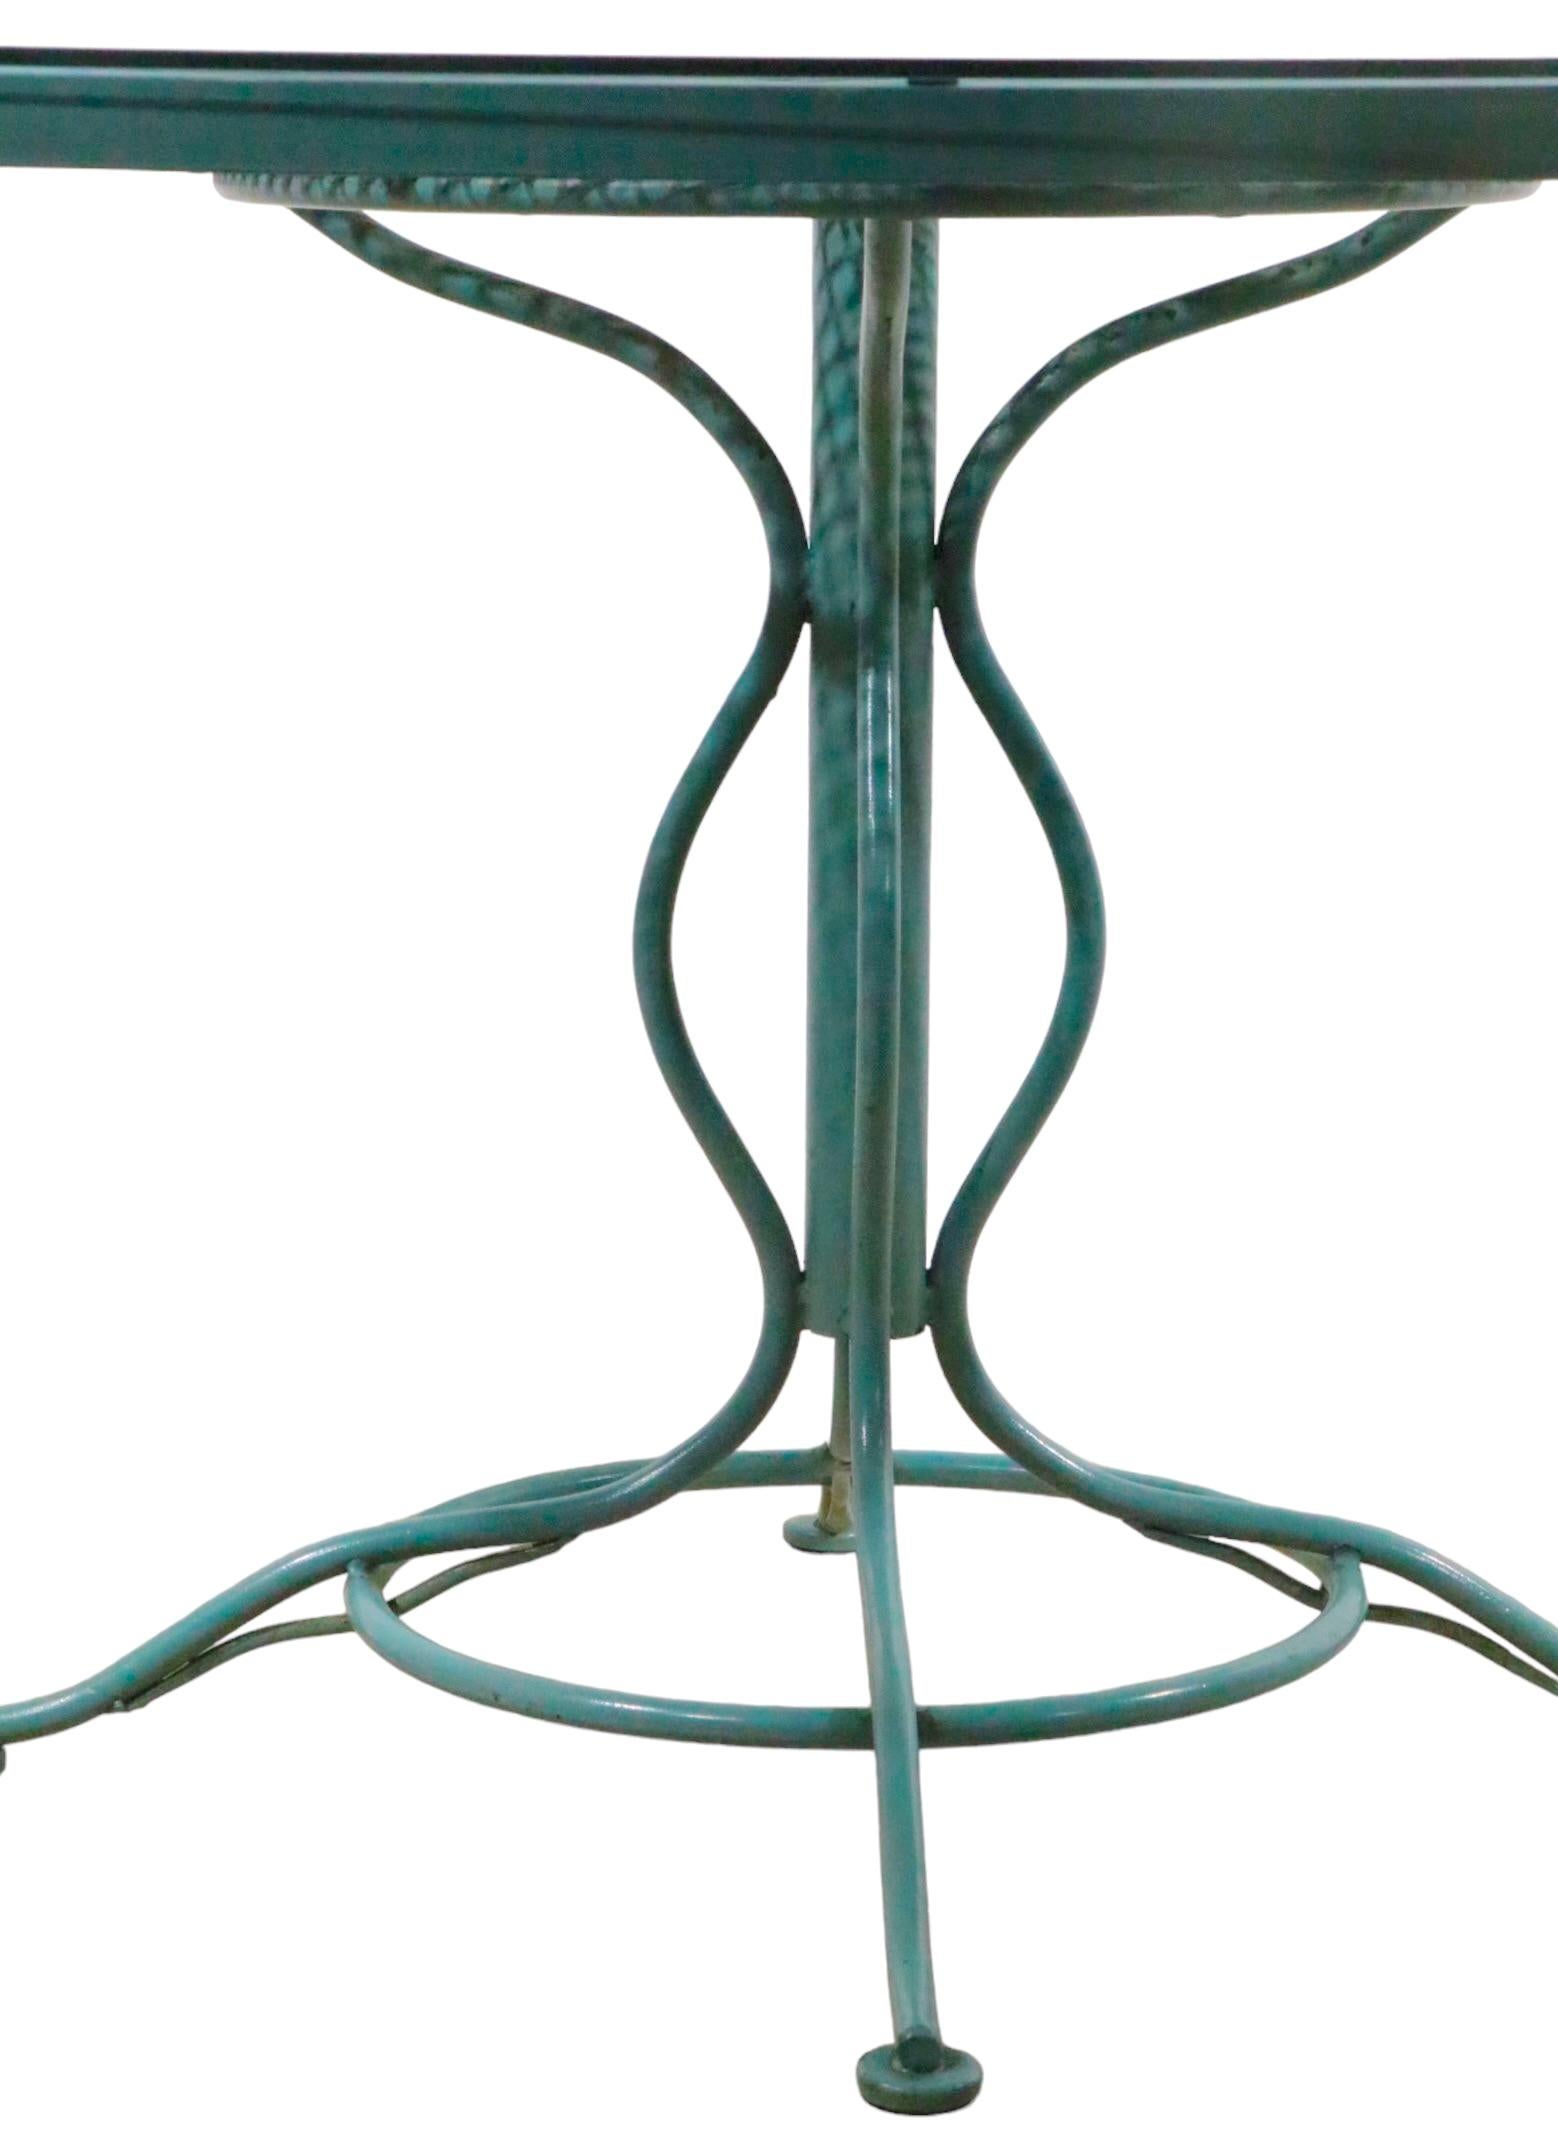 American Wrought Iron and Metal Mesh Garden Patio Sculptura Dining Table by Woodard  For Sale